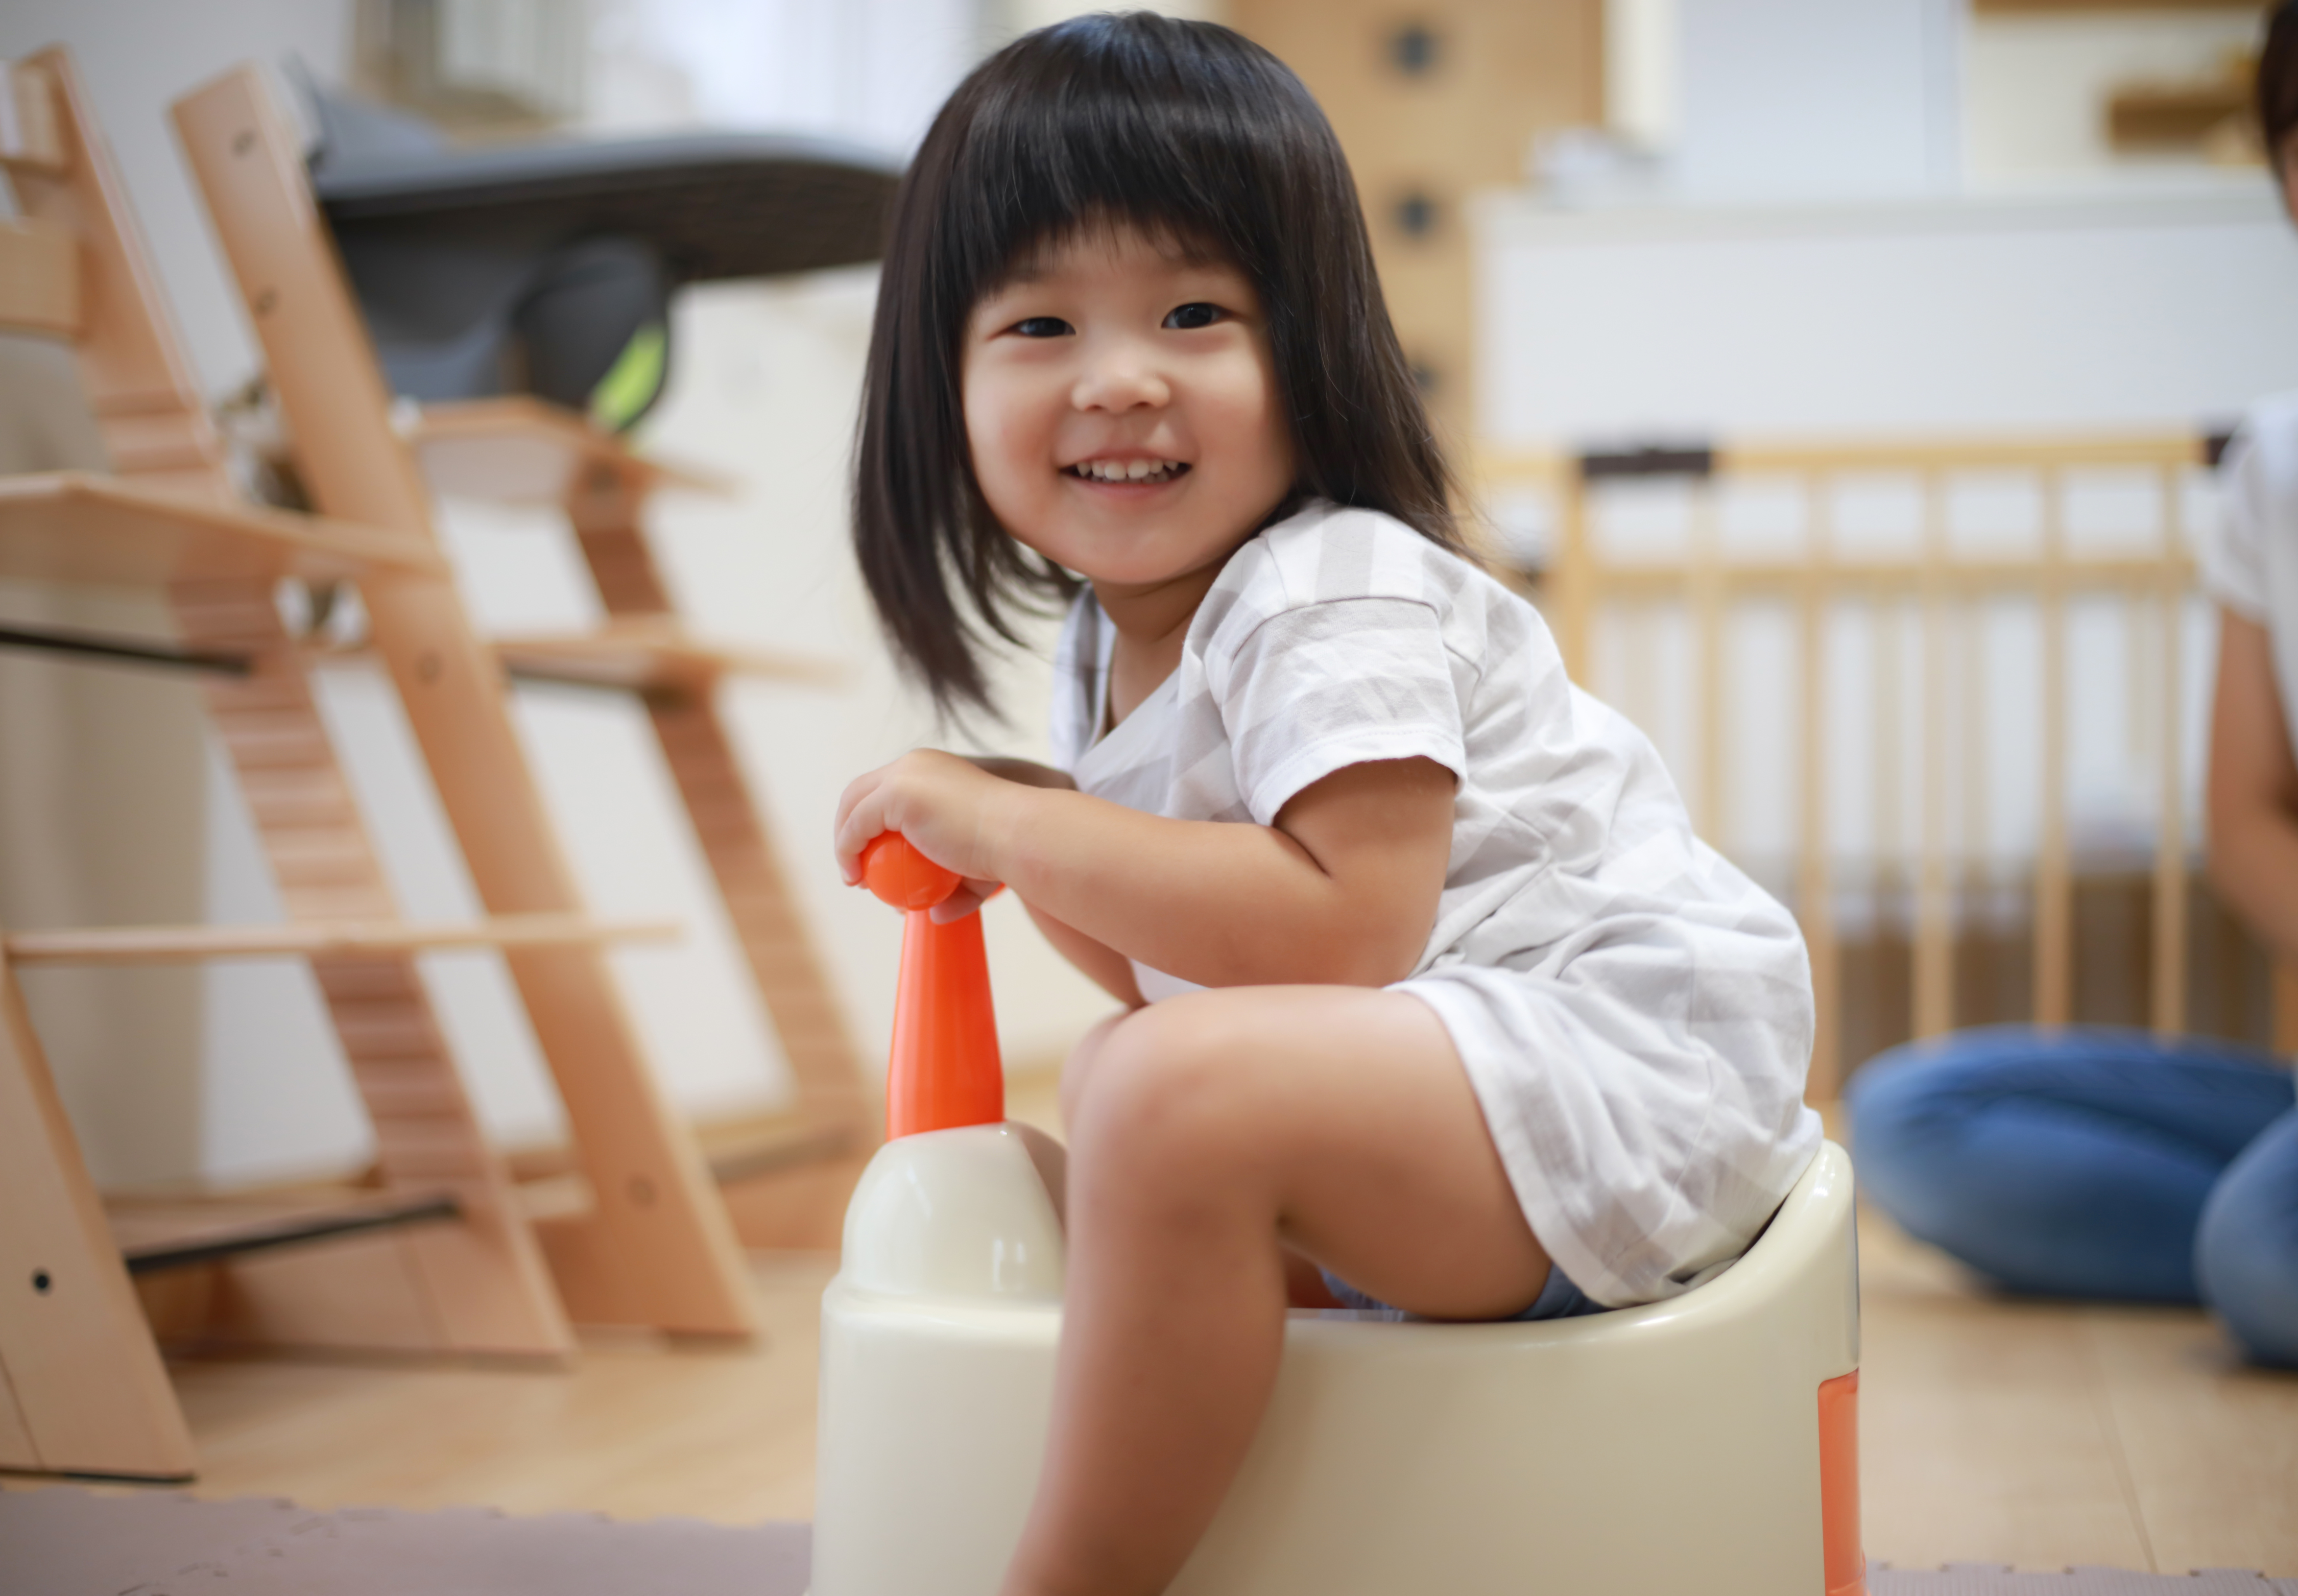 How to Potty Train a Girl: When to Start and Tips for Potty Training Girls